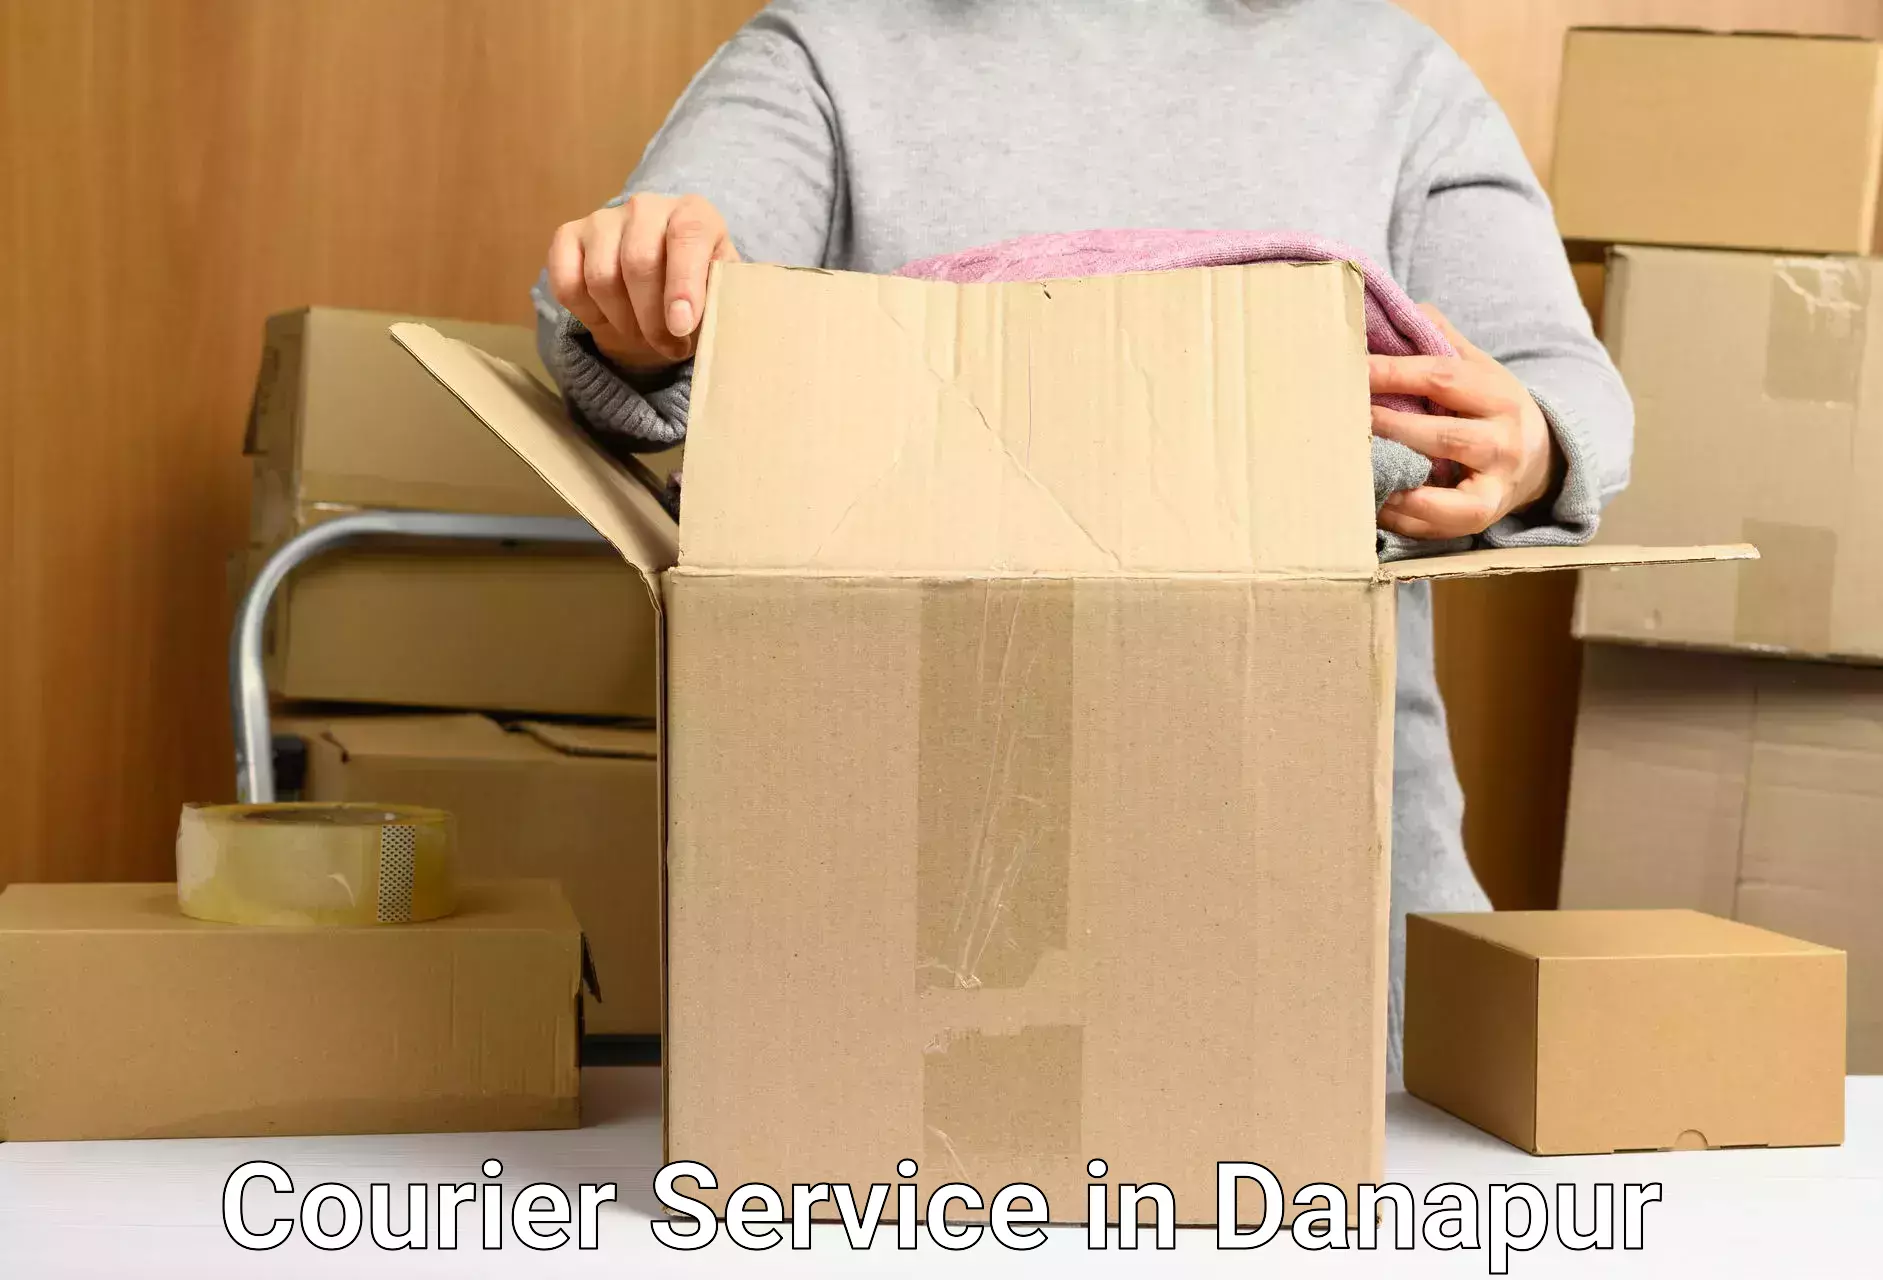 Secure freight services in Danapur